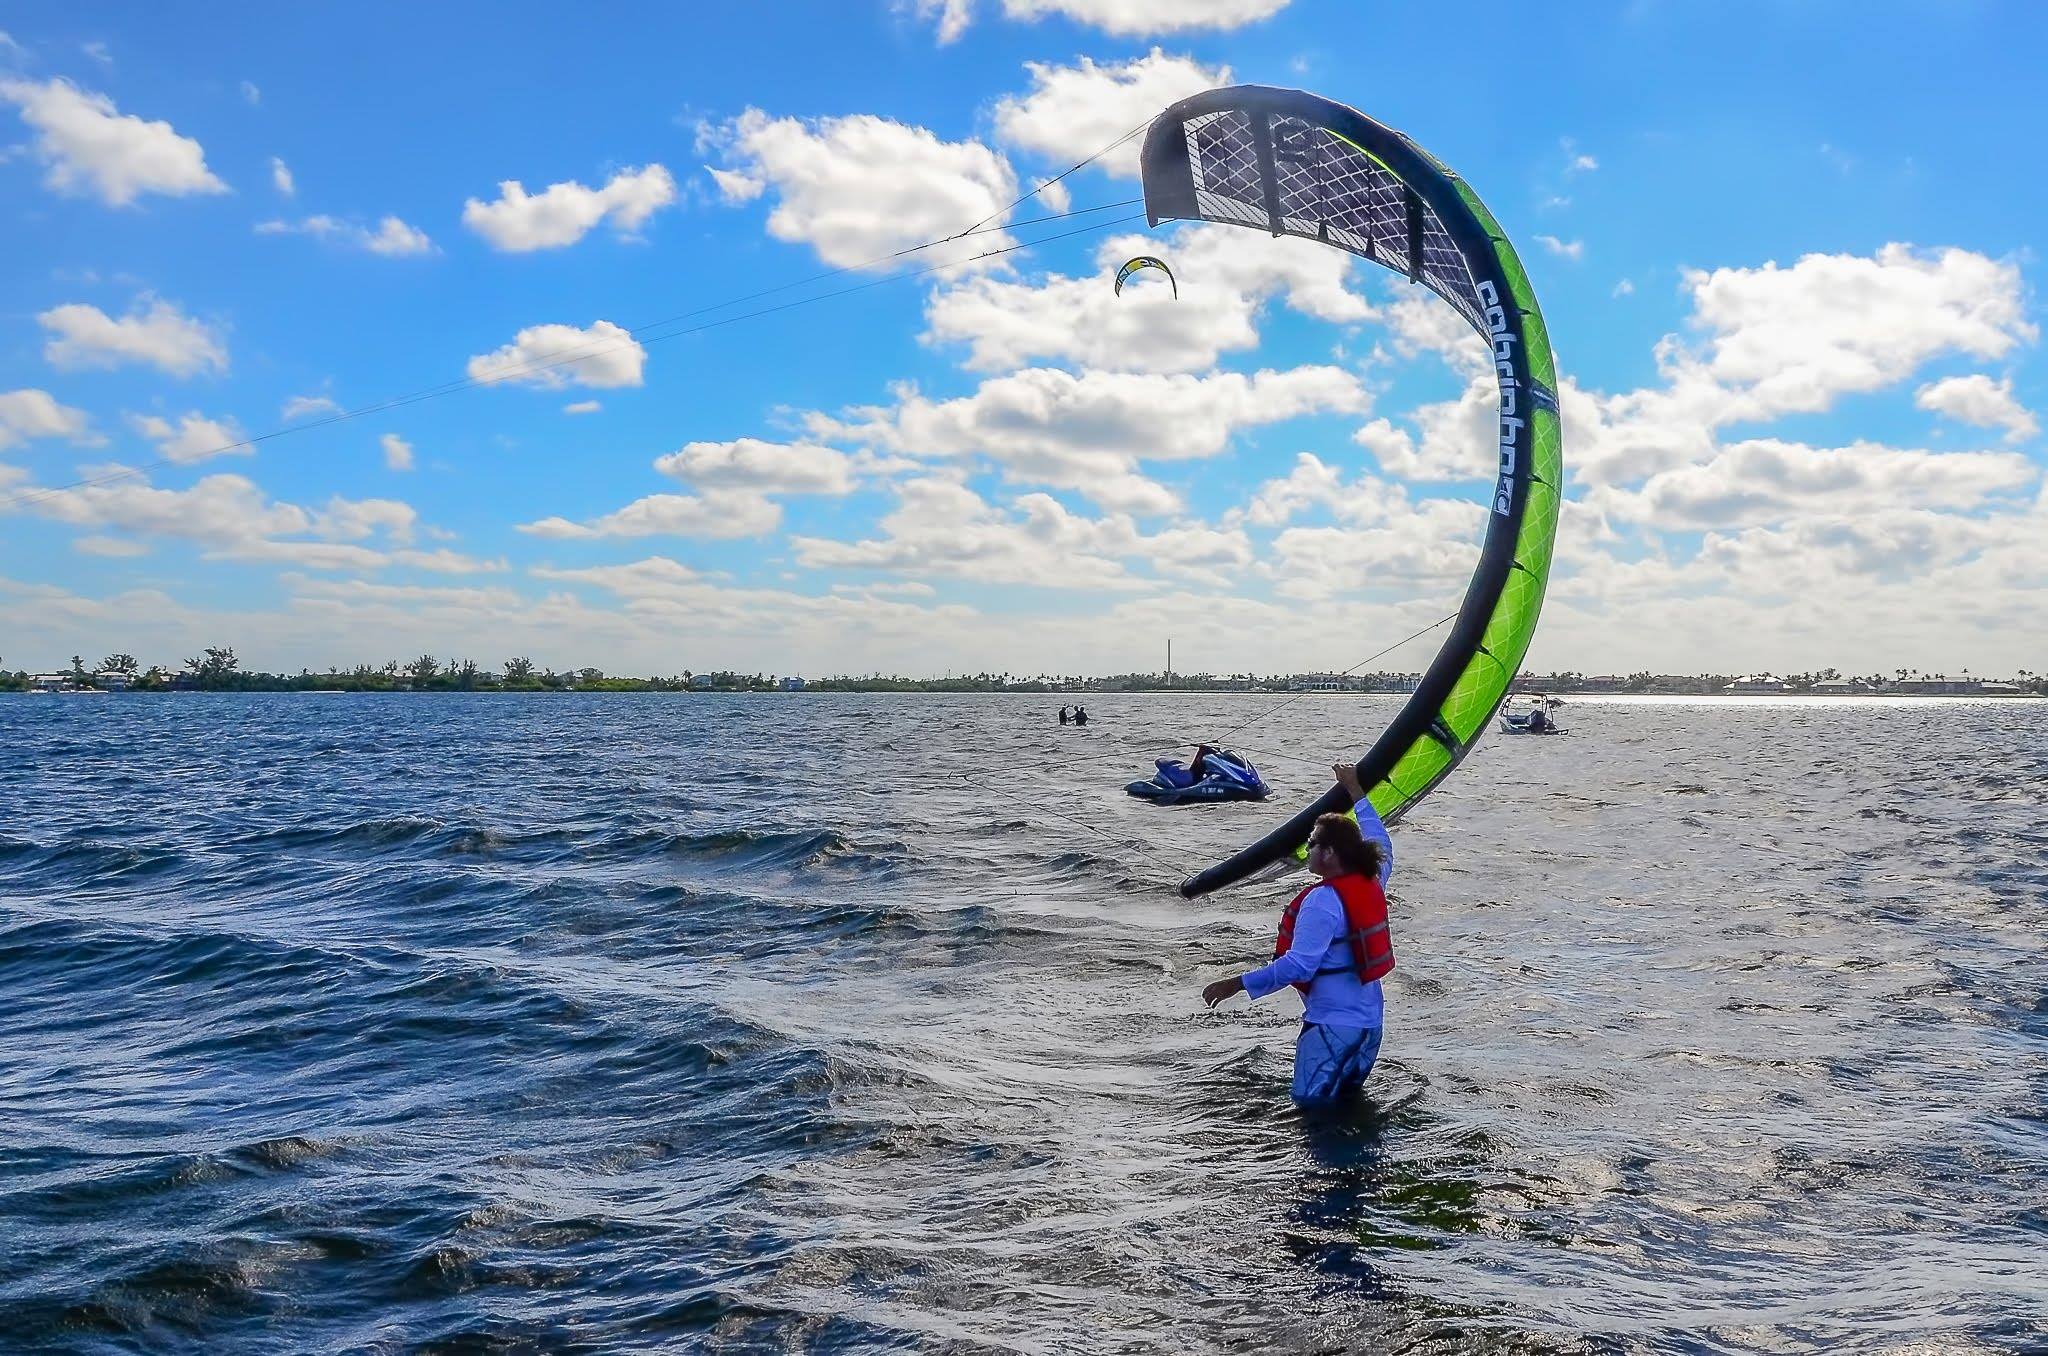 Kite Launching & Landing: Learn to launch your kite safely